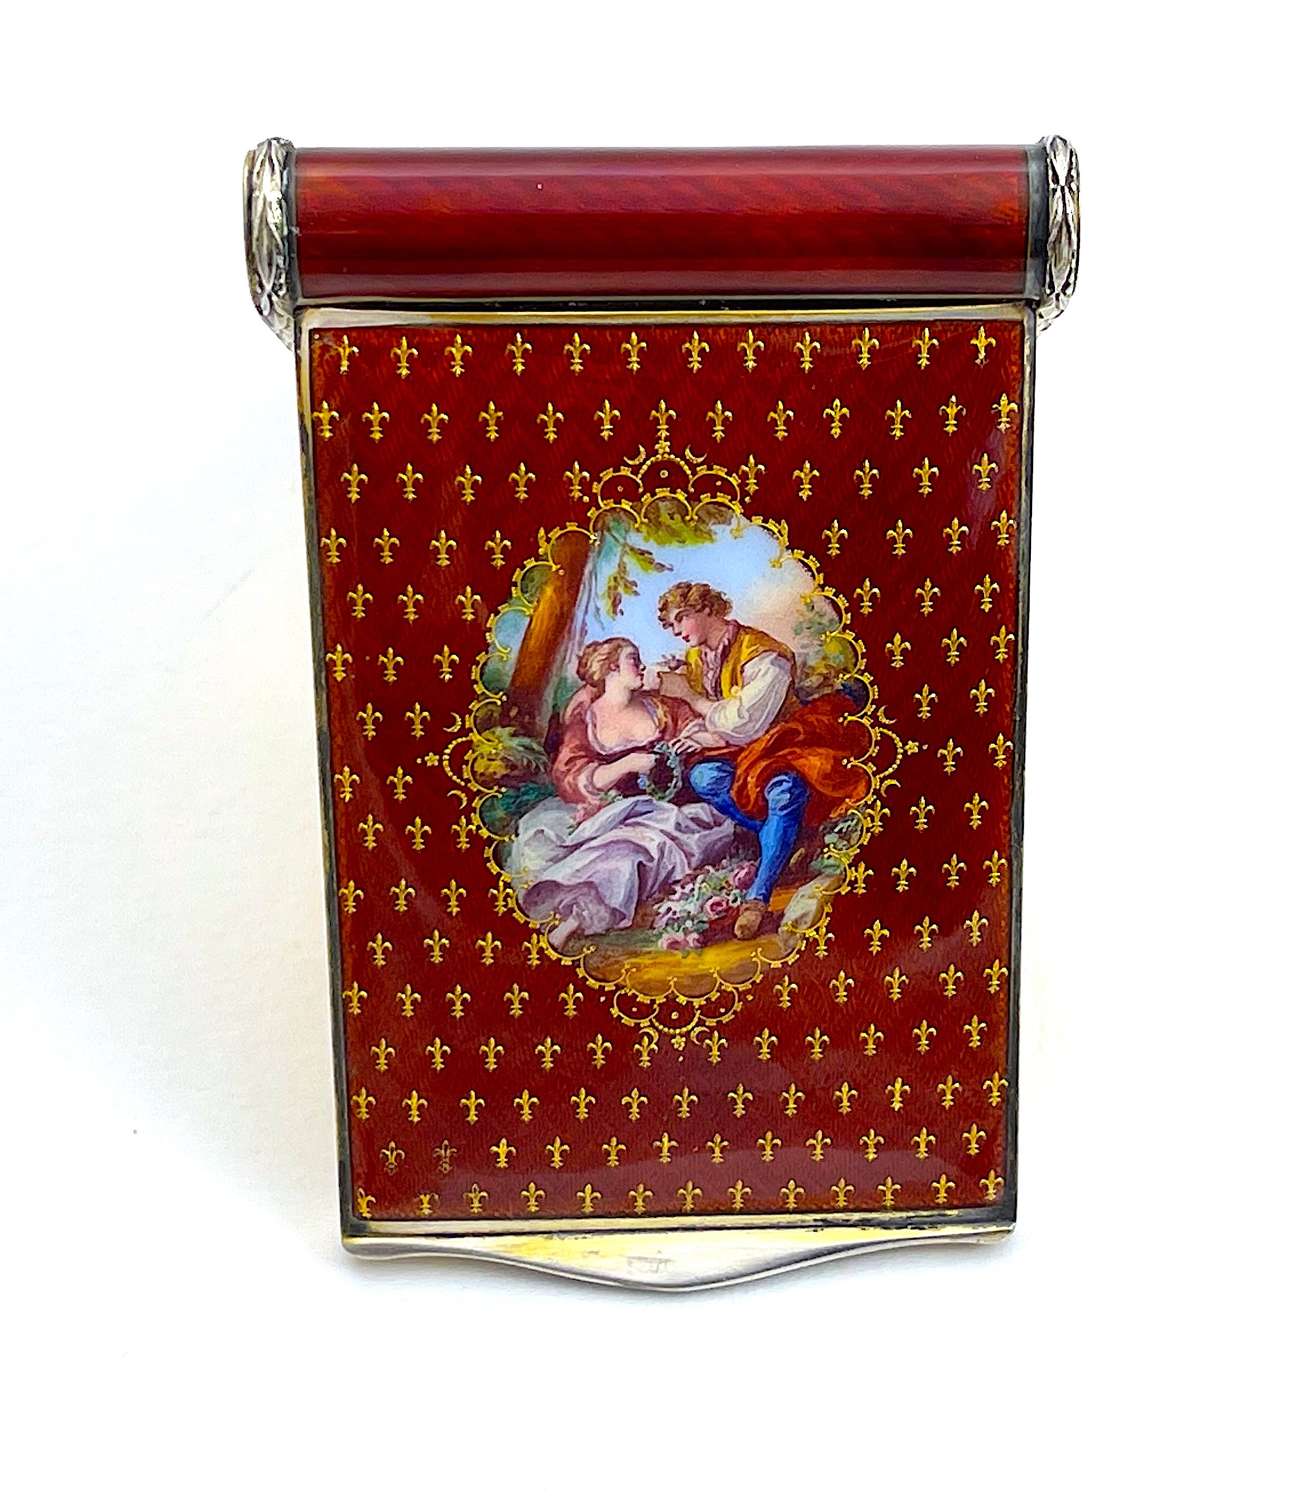 High Quality Antique Silver and Guilloche Enamel Compact Case.